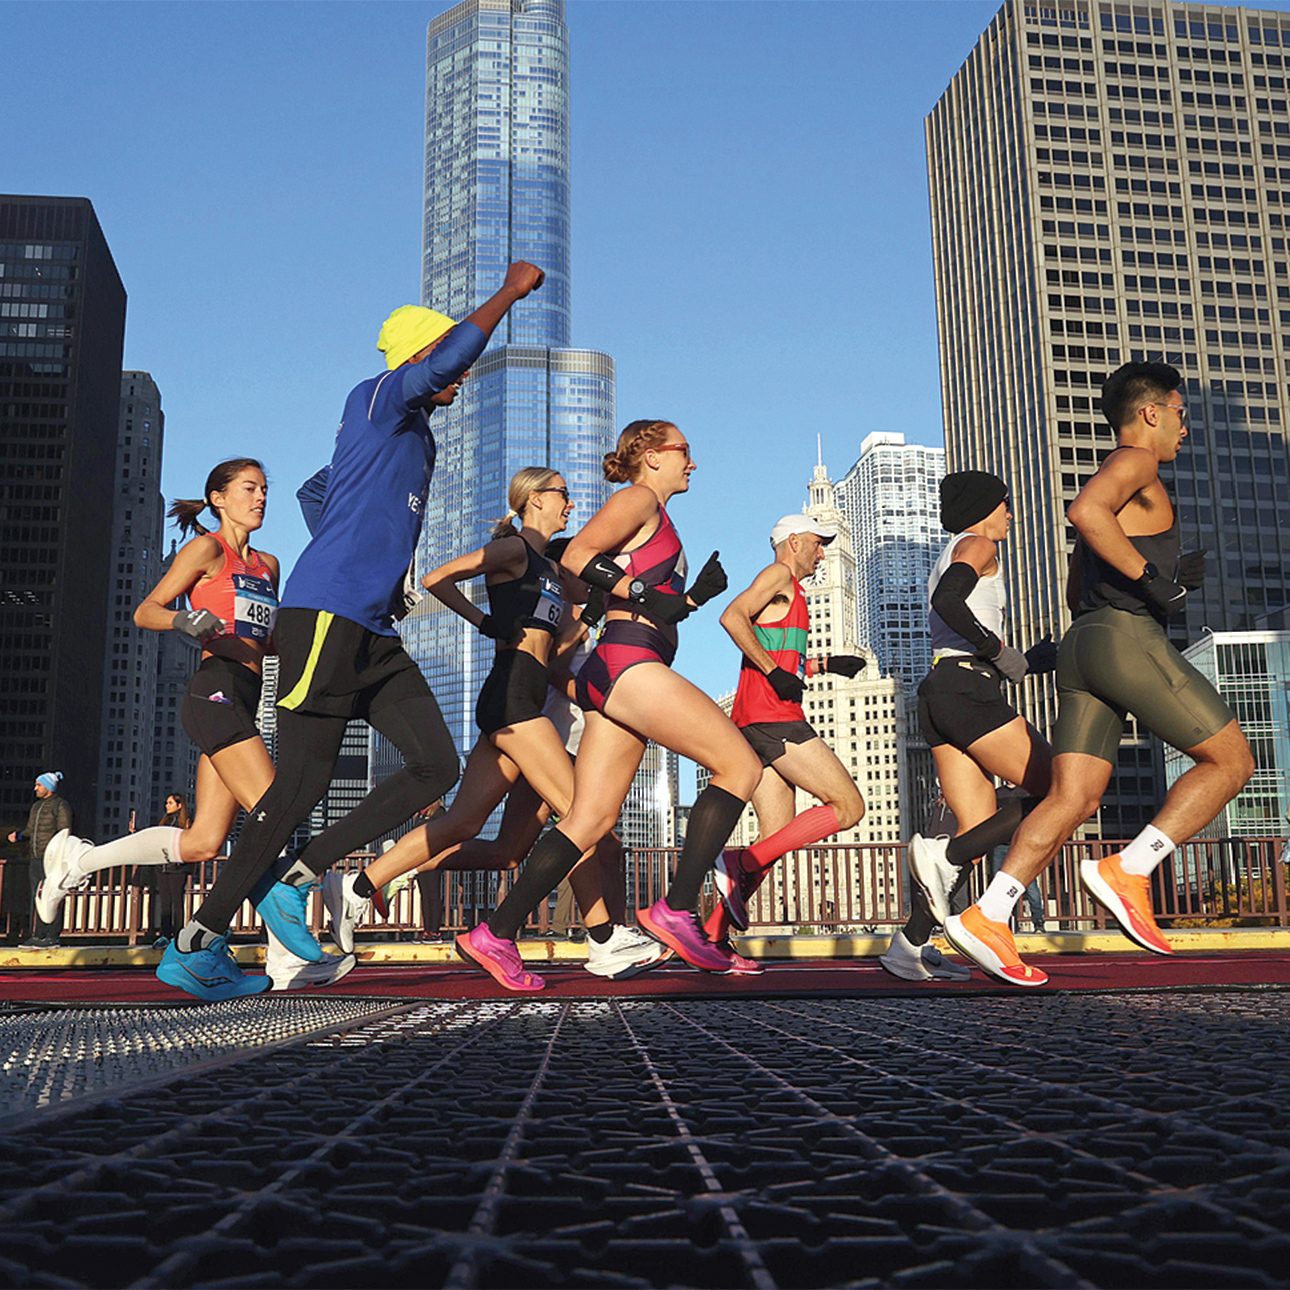 Chicago Marathon runners stride over a bridge that crosses over the river, with tall skyscrapers in the back.